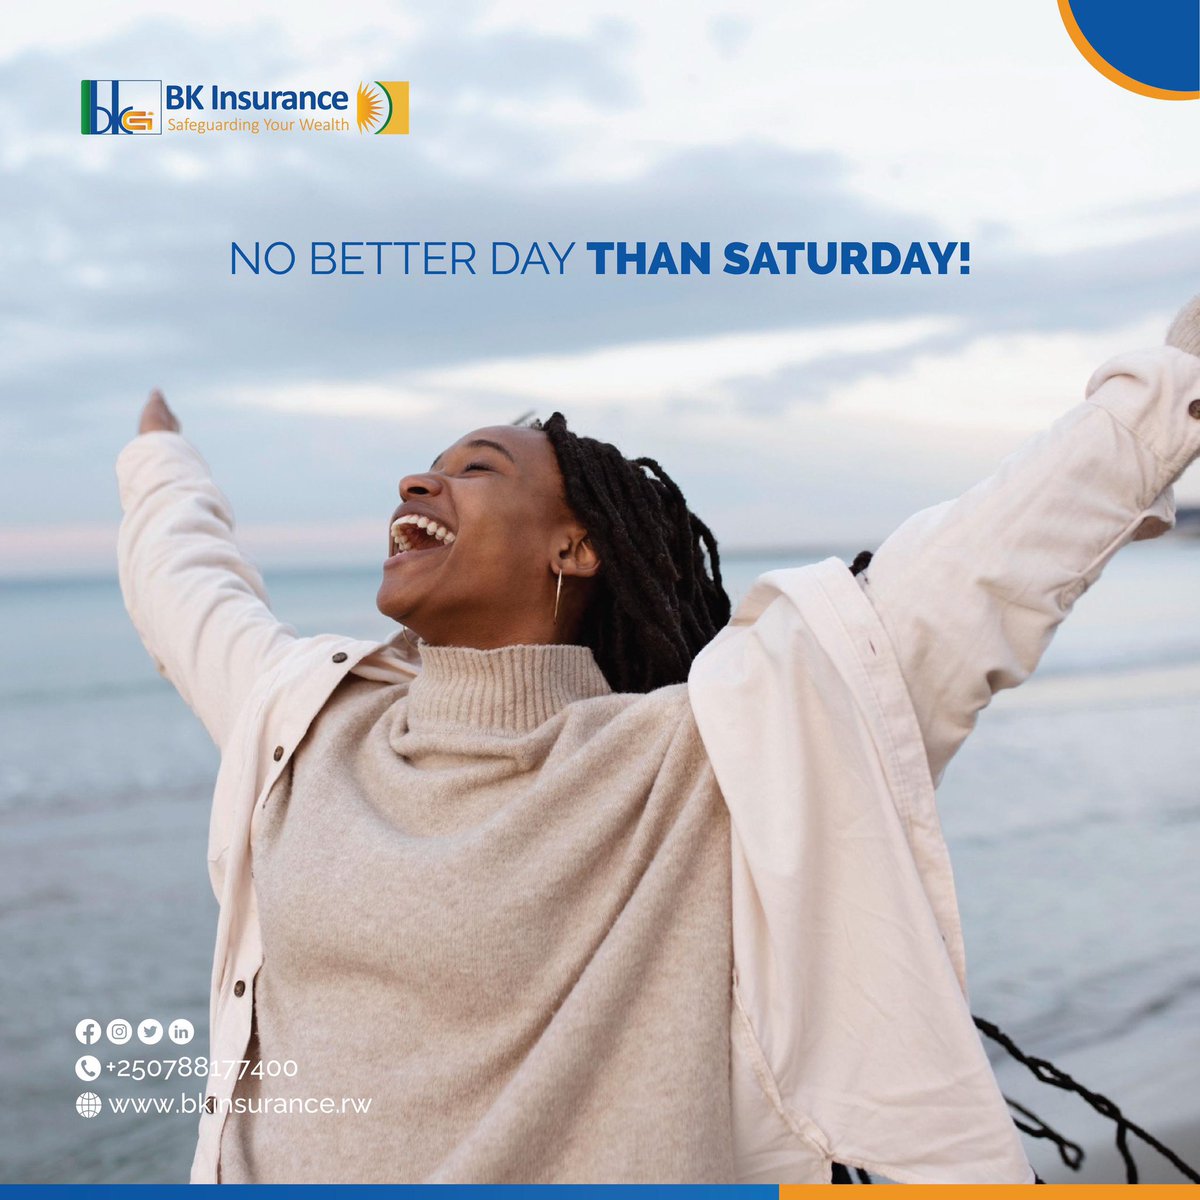 Embrace the weekend breeze and let your worries seize. Saturday's here for you to unwind! #BKInsurance #Rwot #RwoX